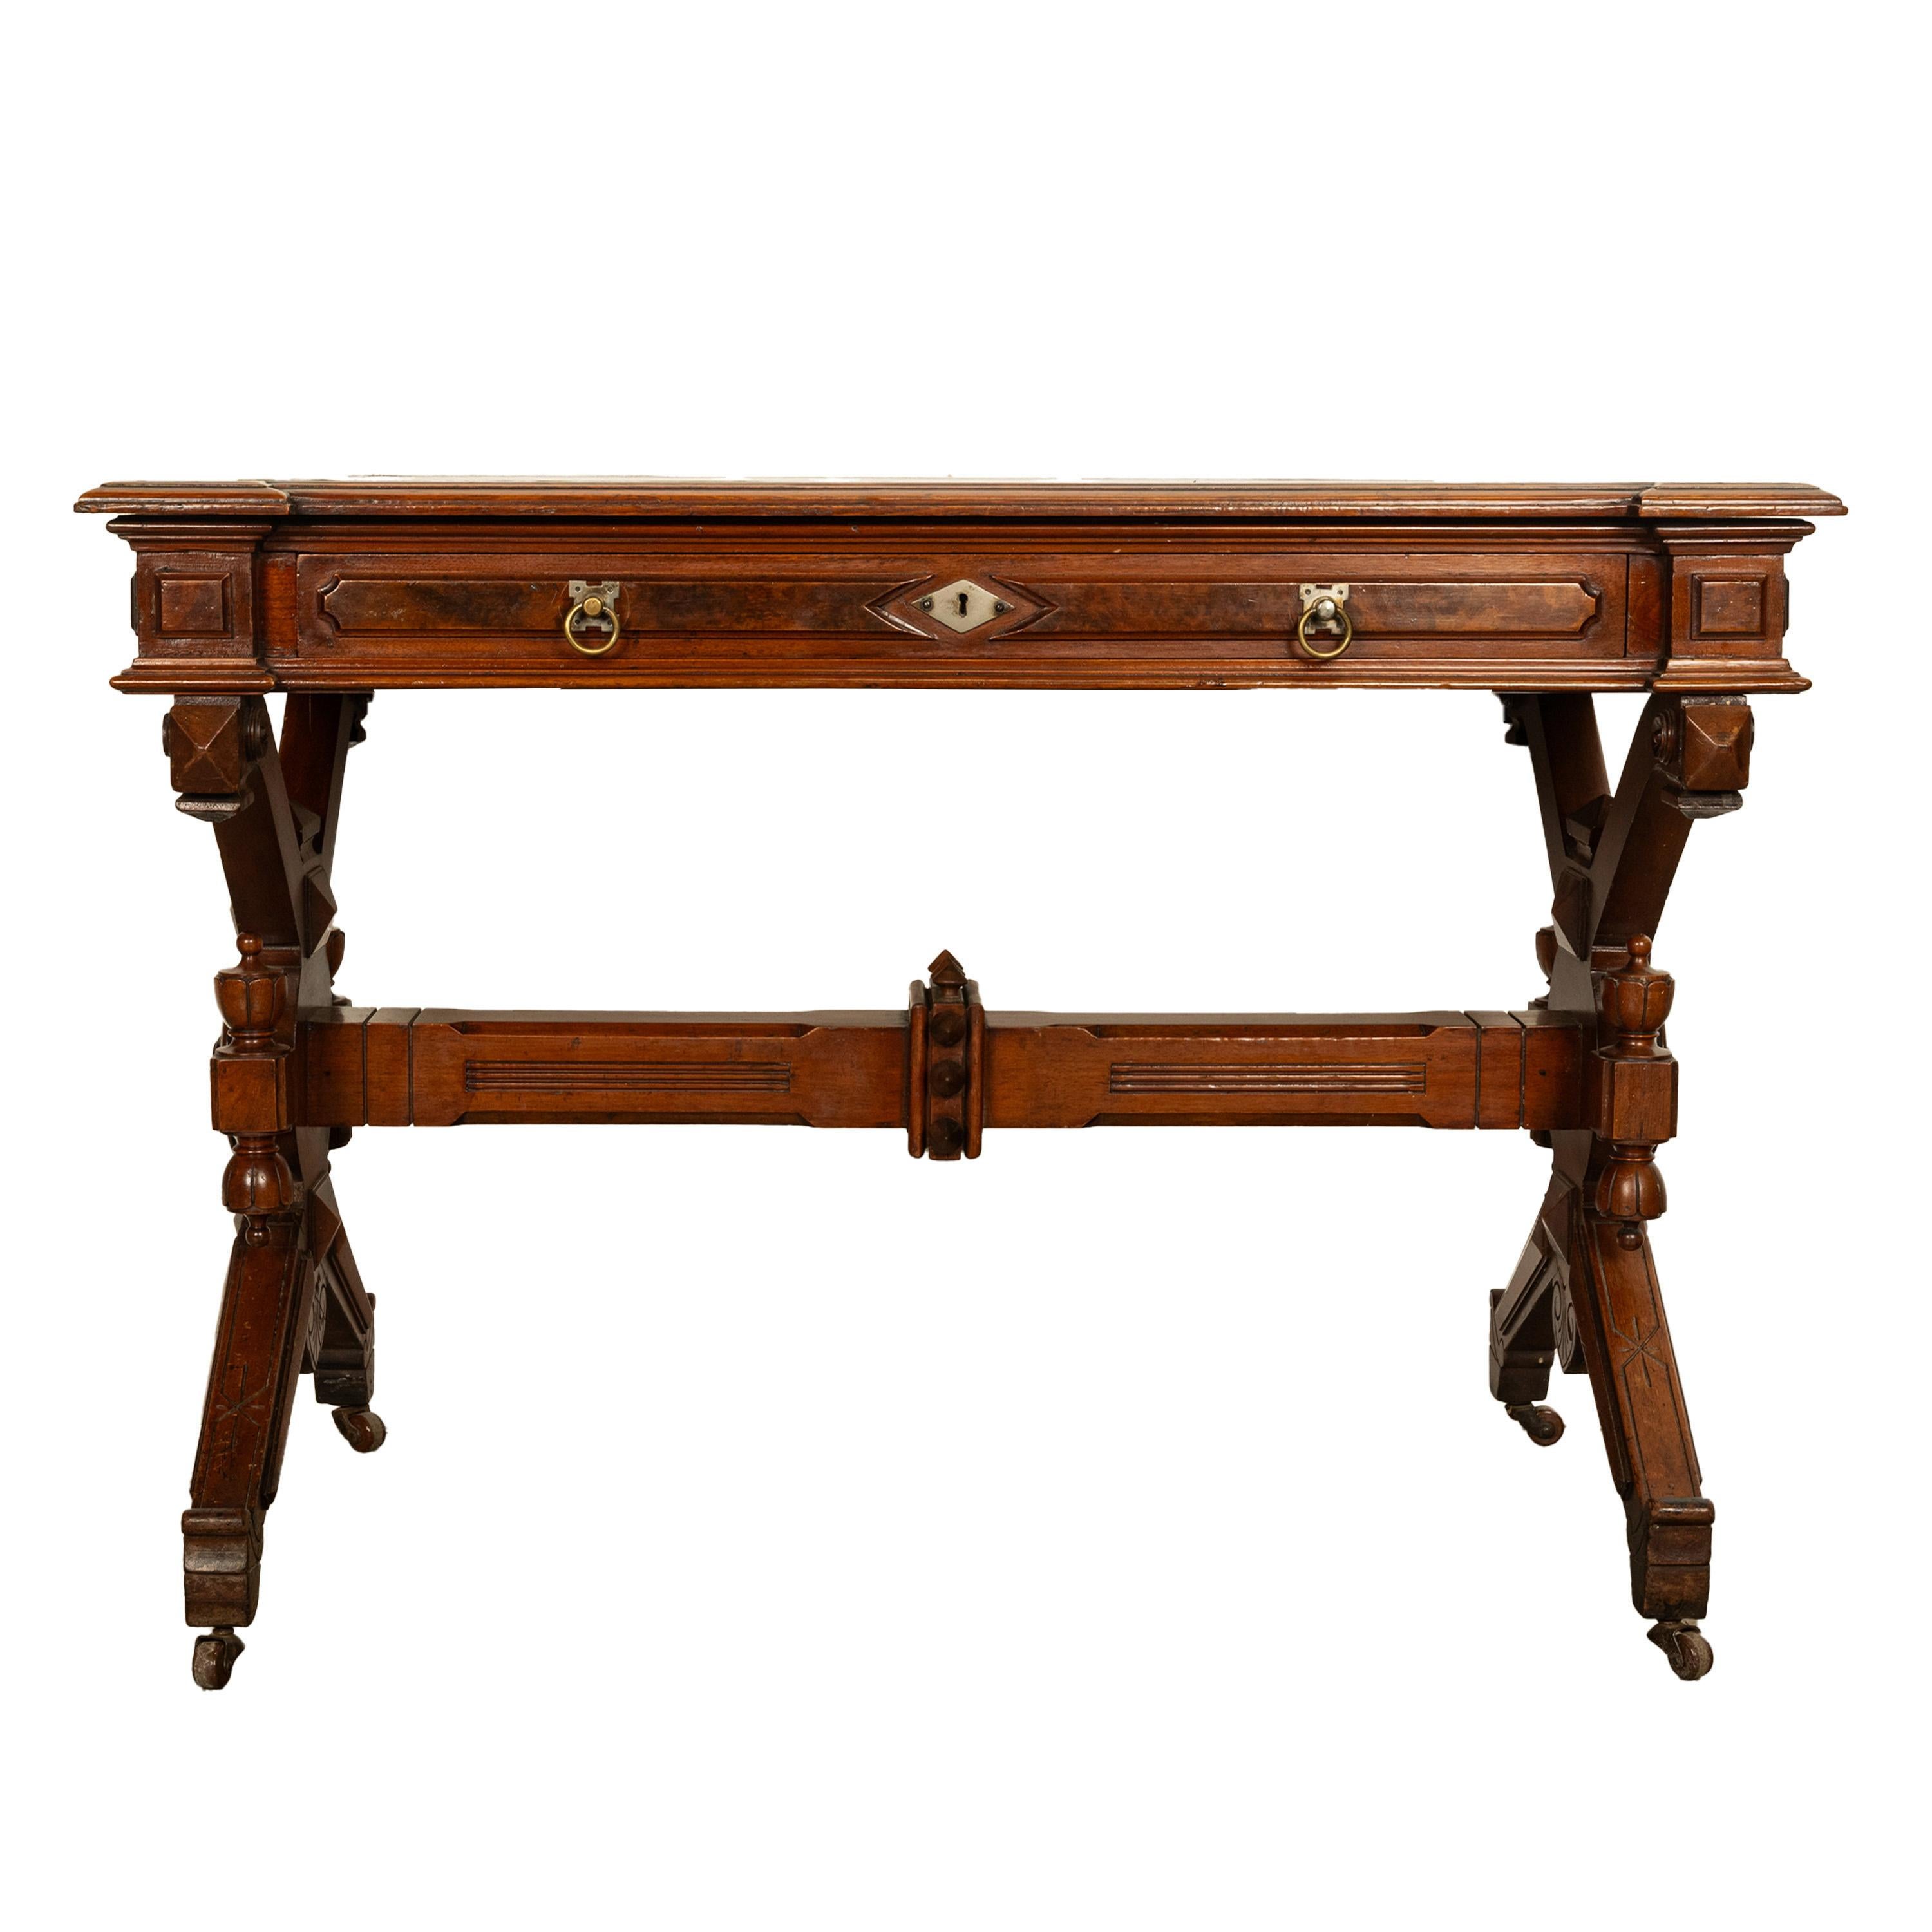 Antique American Walnut Renaissance Revival Aesthetic Movement Desk Table 1875 In Good Condition For Sale In Portland, OR